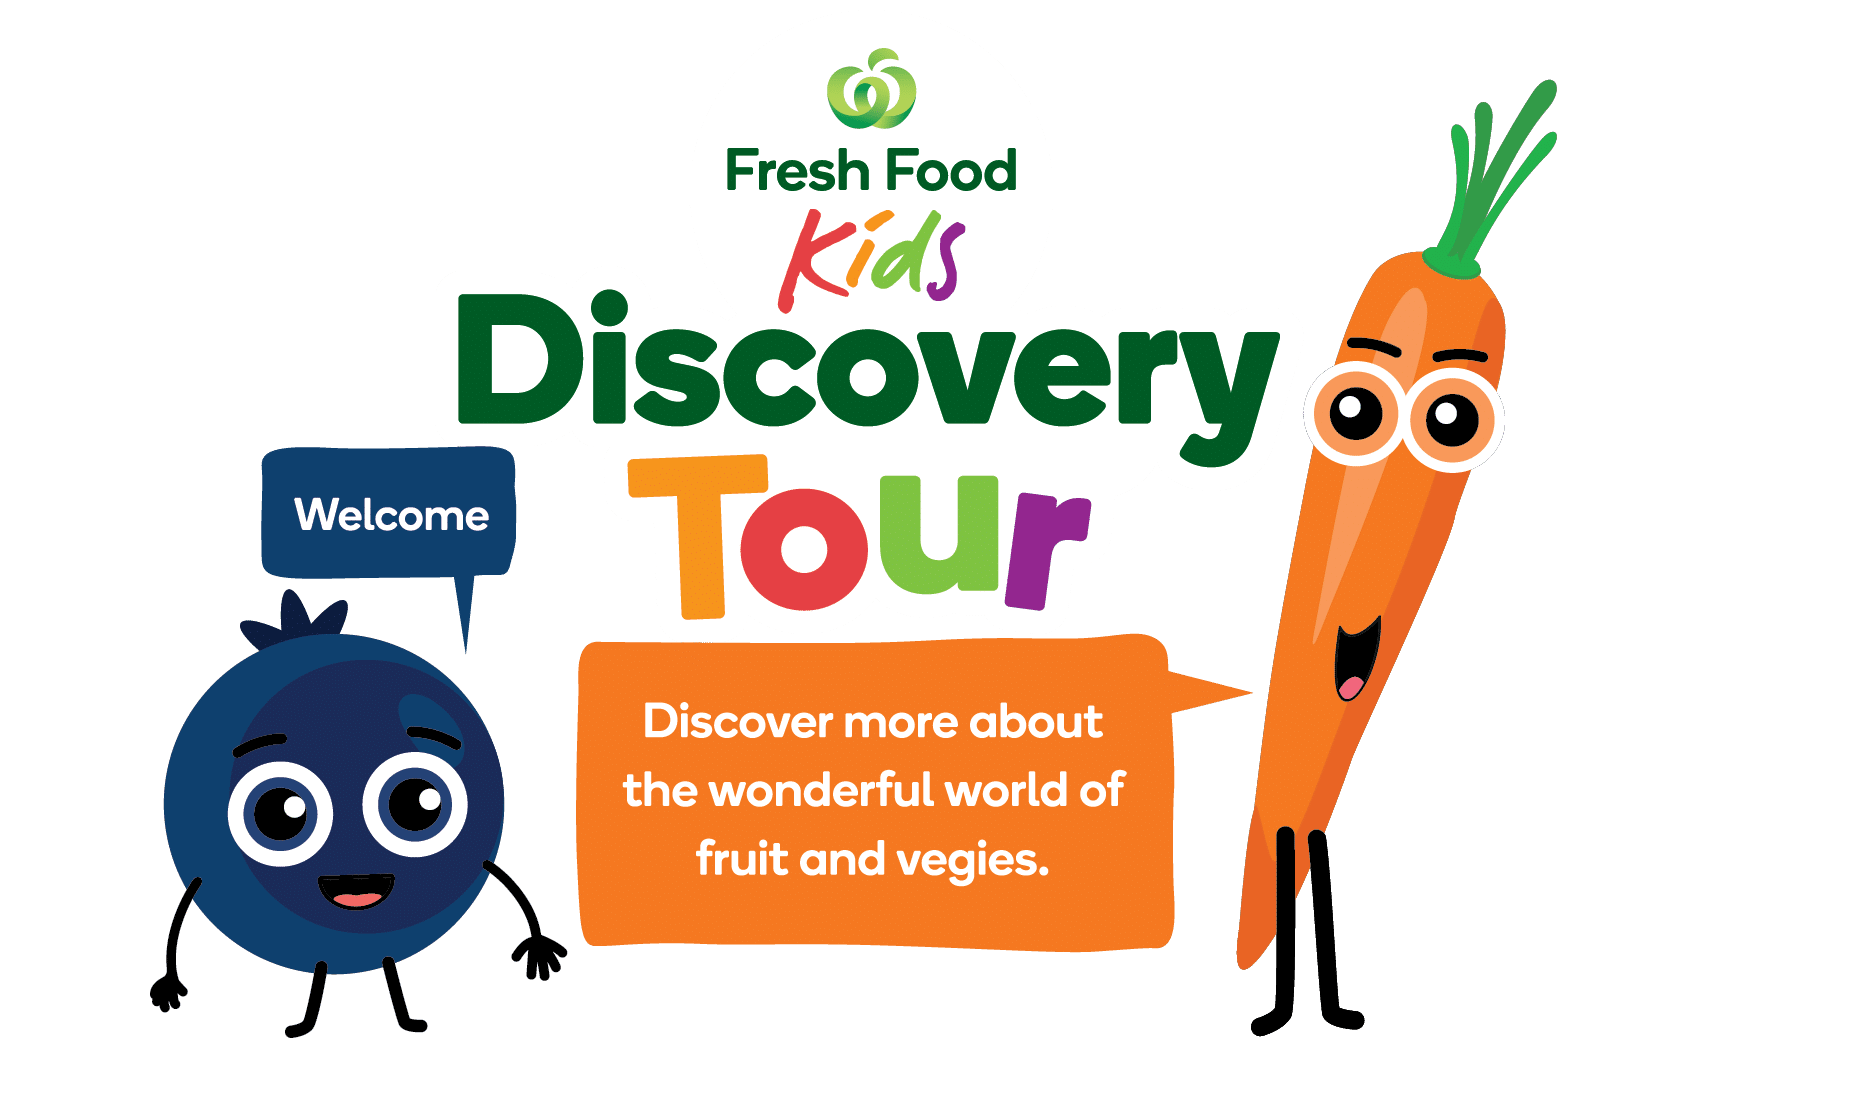 Woolworths Fresh Food Kids Discovery Tour